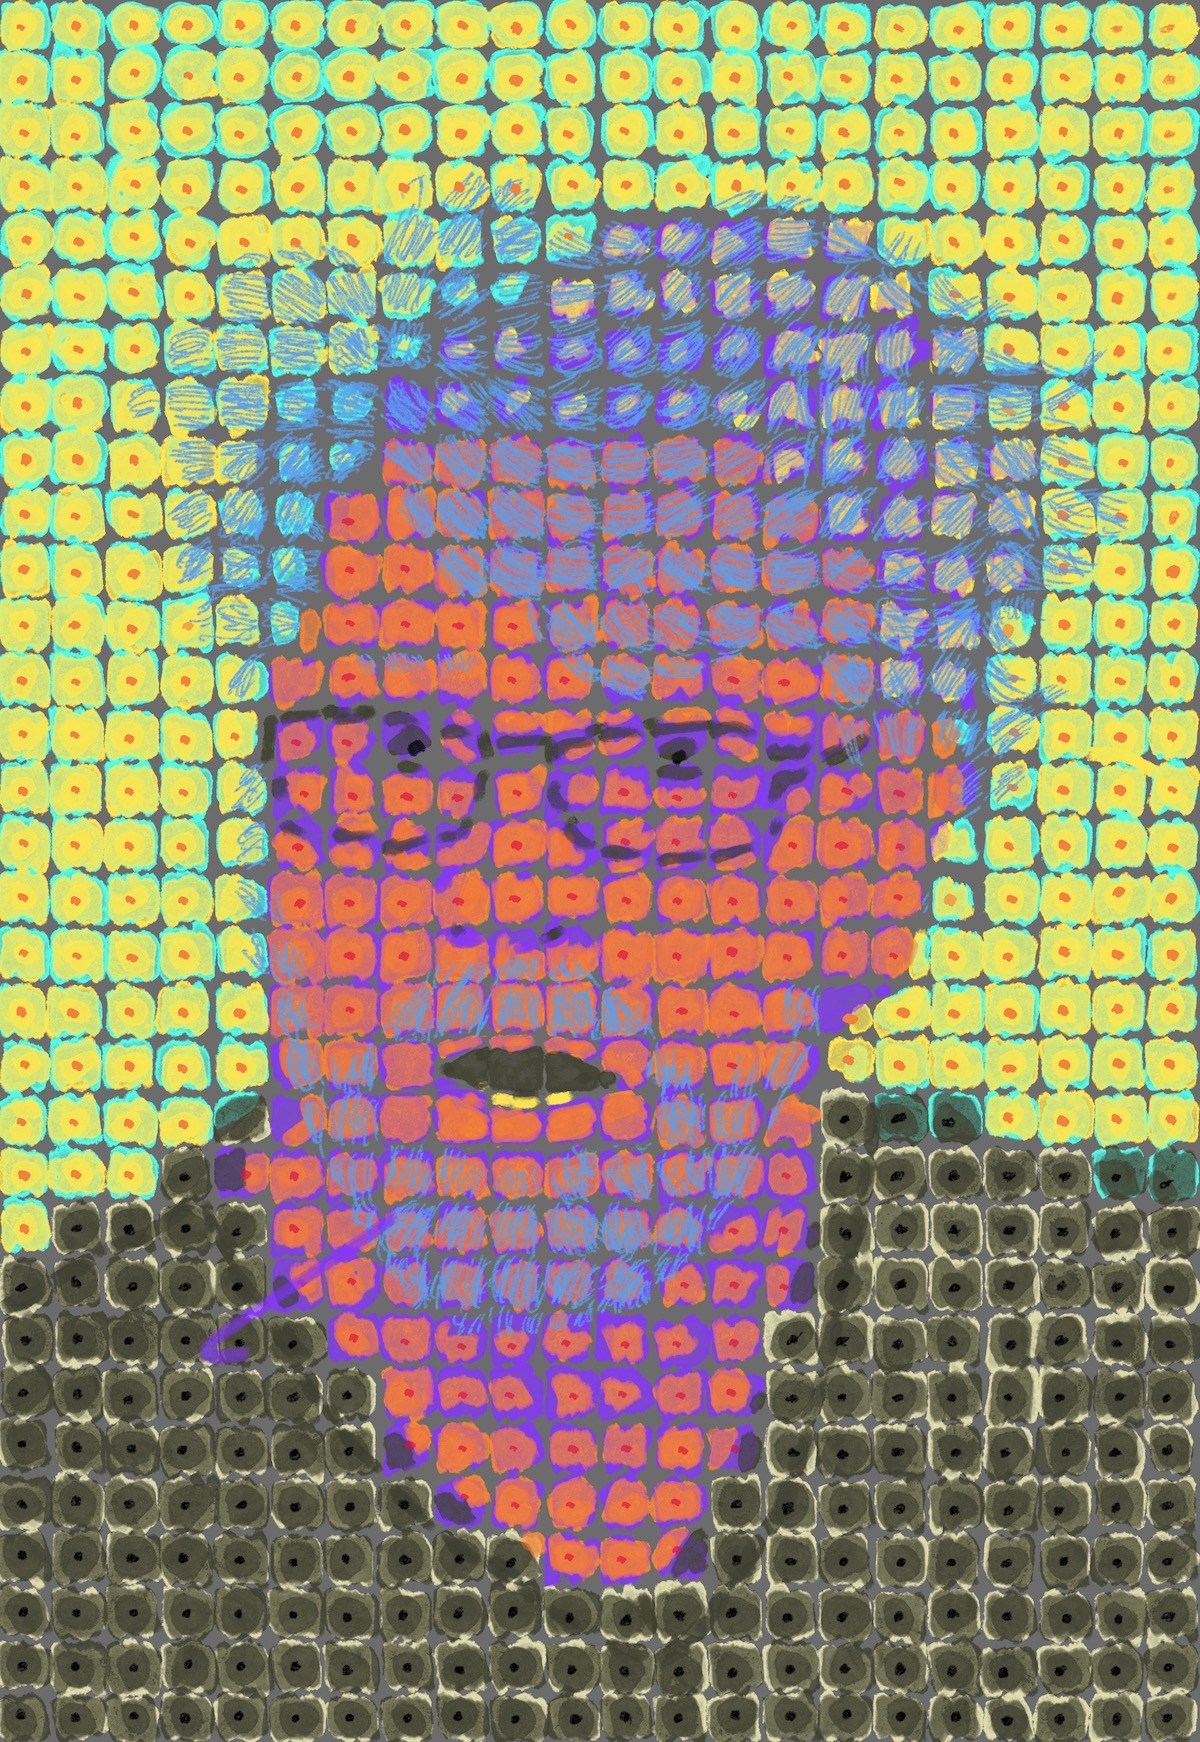 Thomas Beutel's self portrait in the style of Chuck Close